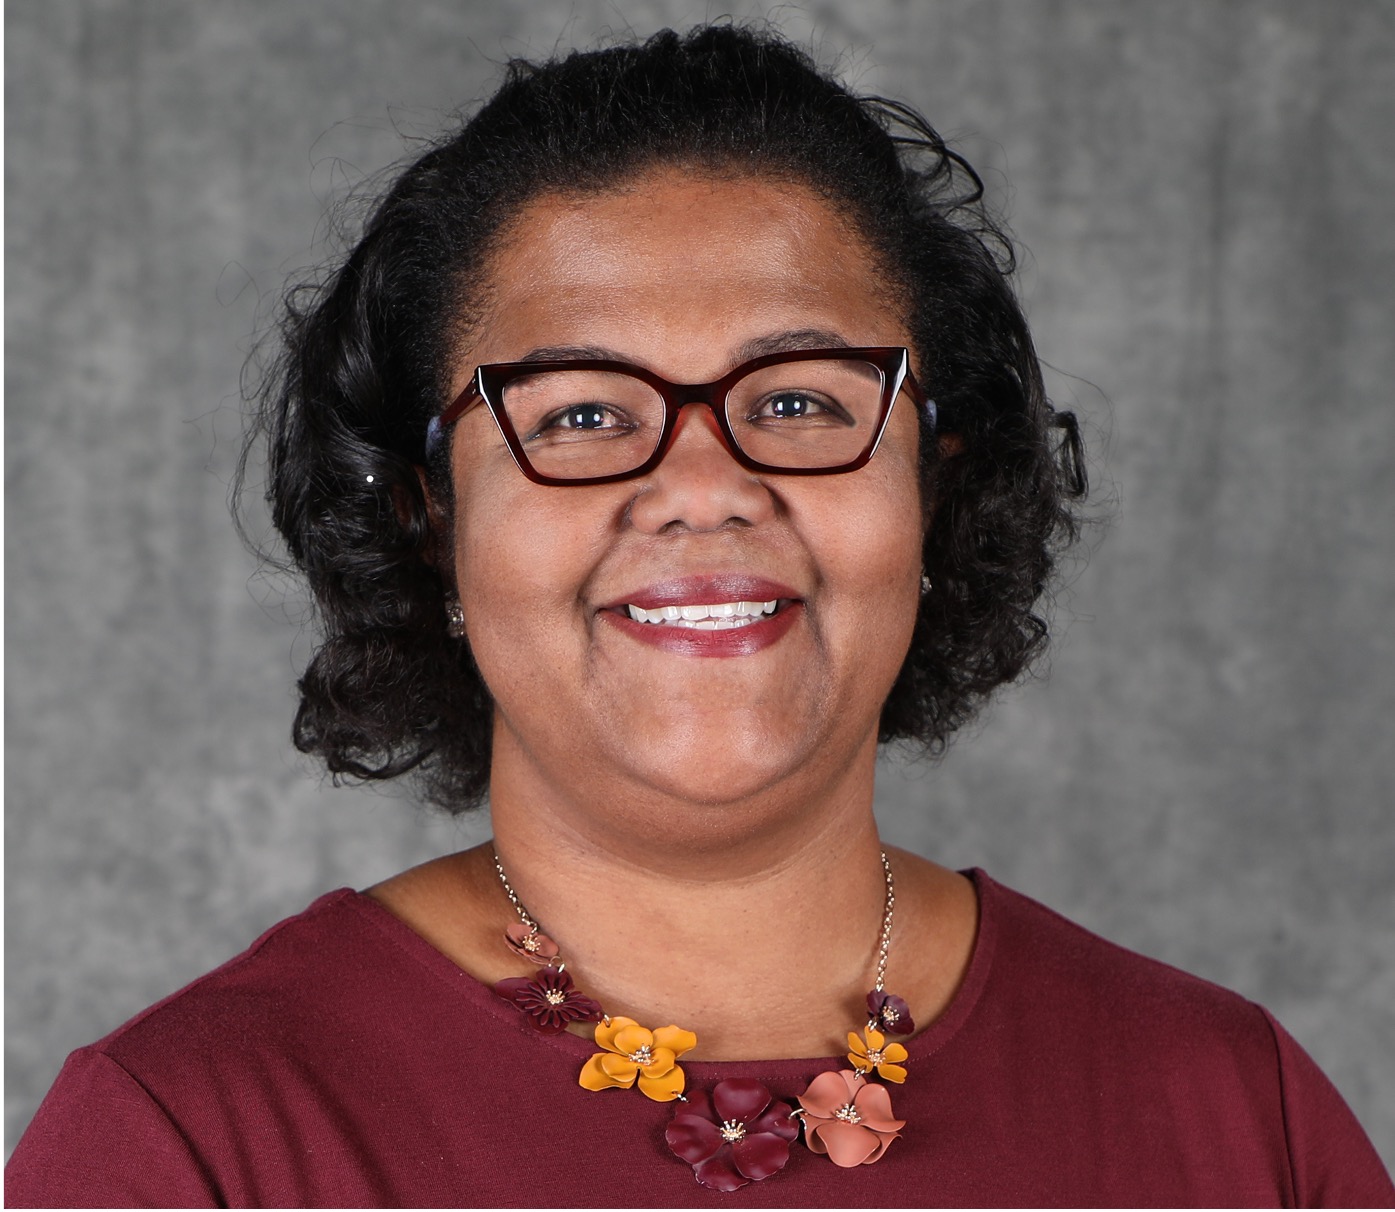 Photo of Dr. Nicole Cooke. | She is a Black woman wearing maroon-colored glasses.  She also has on a maroon-colored top and a necklace with maroon-colored flowers.  